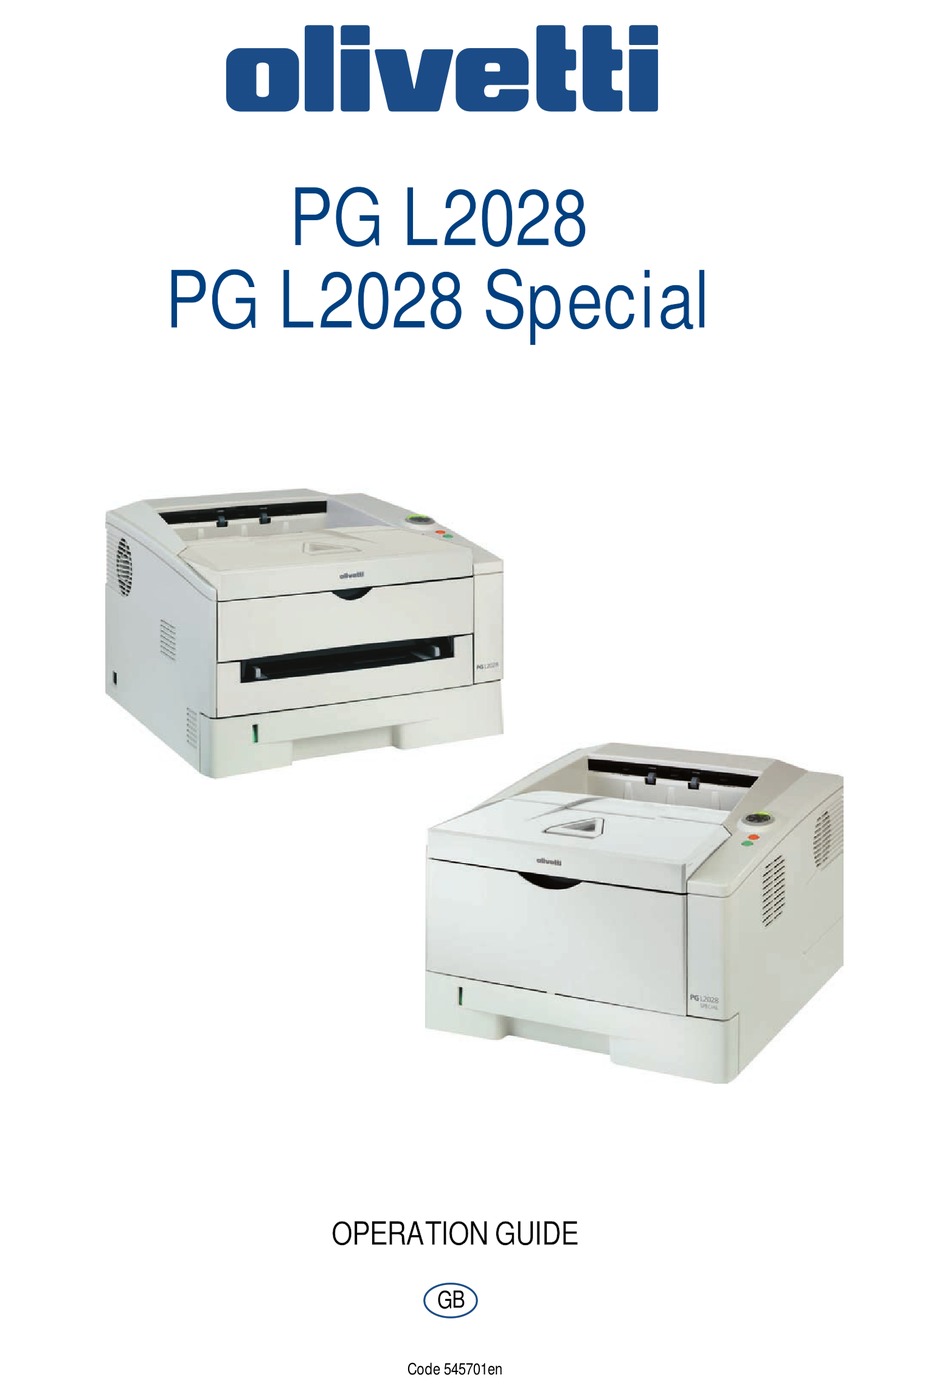 PG L2028 and PG L2028 Special